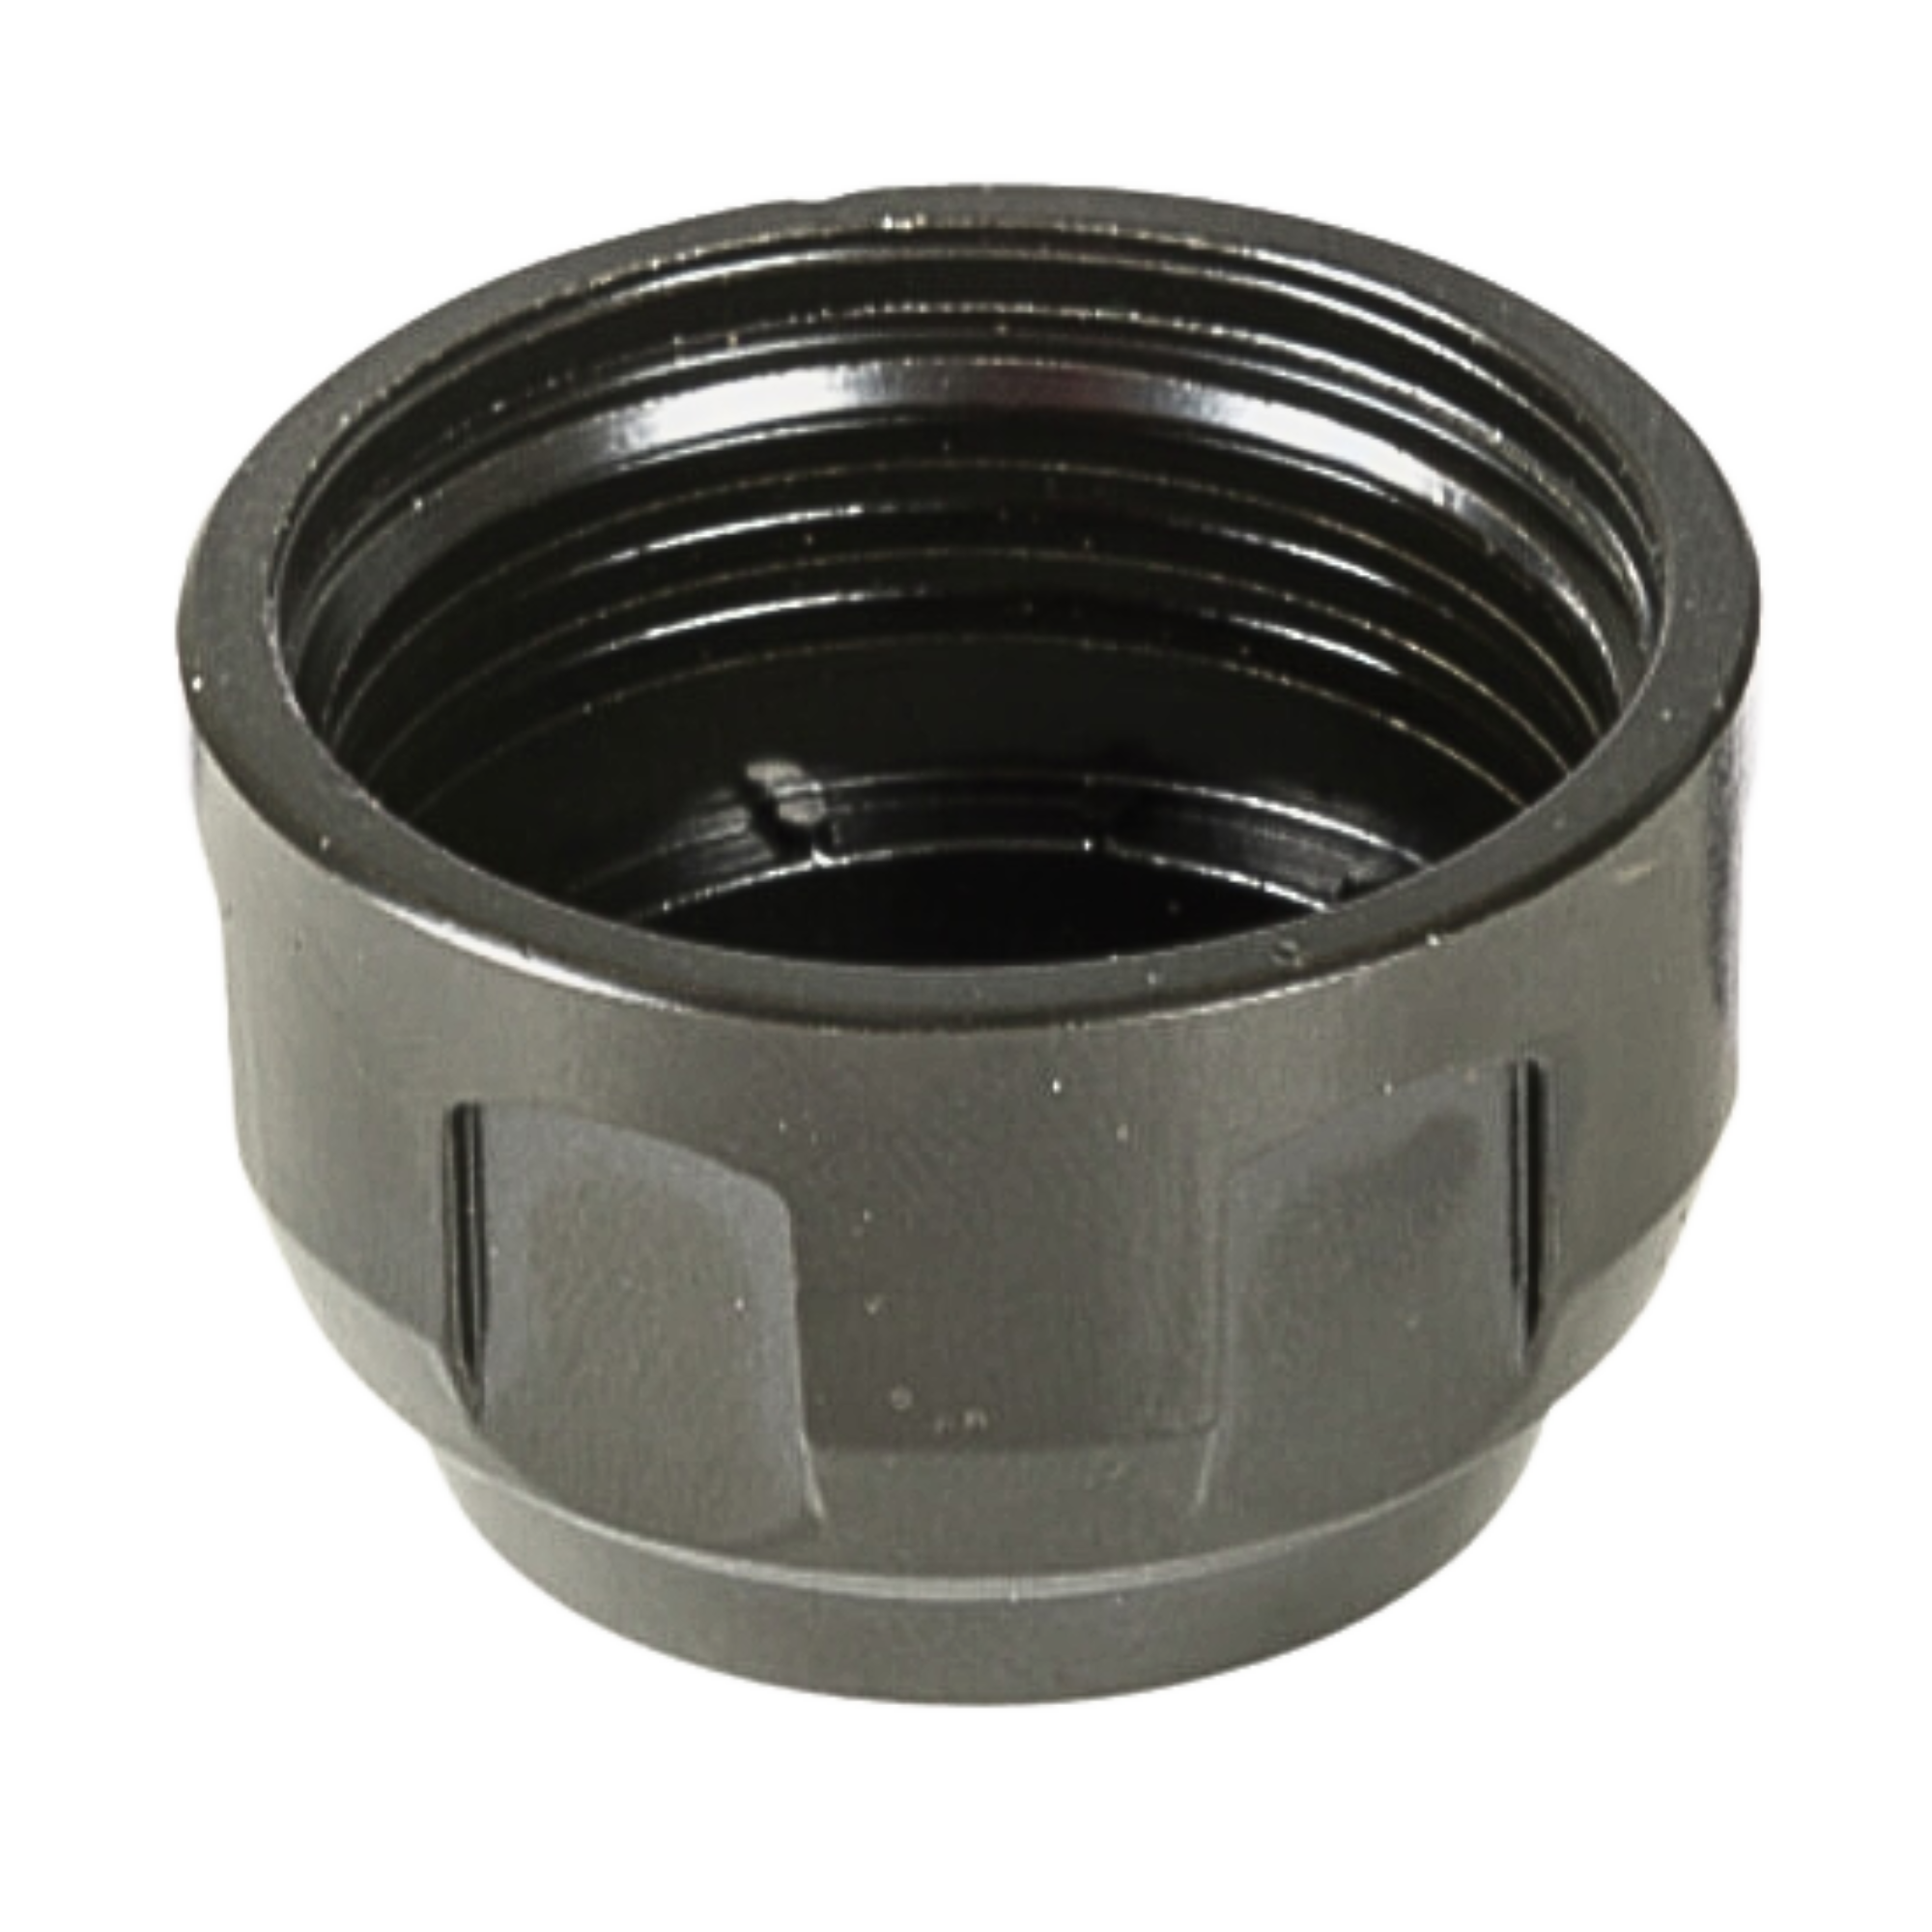 Prevost l PPS1 NUT - 1/2" Aluminum nut l PPS1 NUT16 used on prevos1 product line